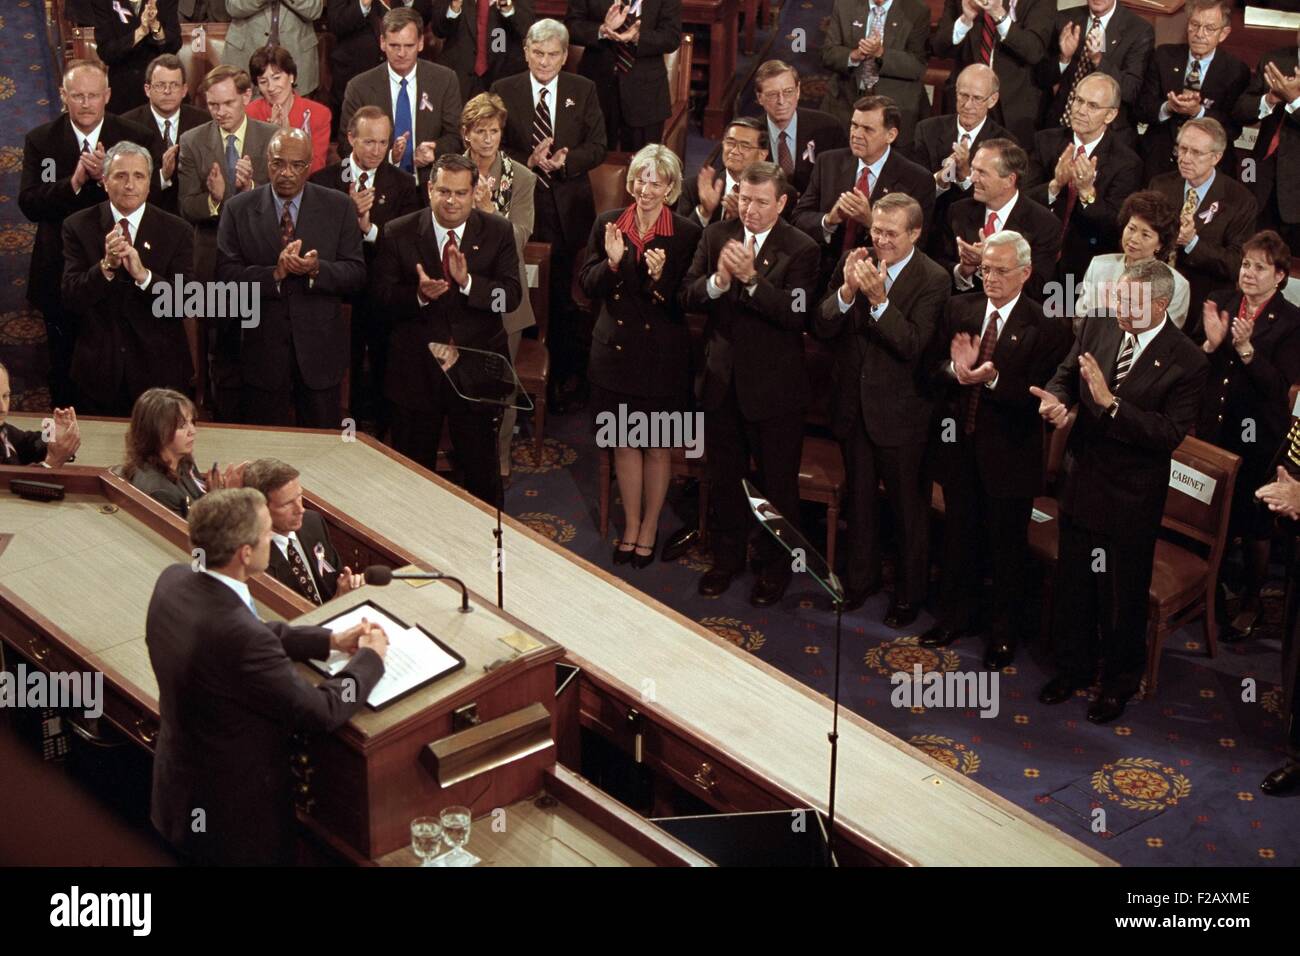 President George W. Bush speaks to a Joint Session of Congress about the 9-11 Terrorist Attacks. Sept. 20, 2001. He stated the attacks were motivated by Al Qaeda's hatred of '…our freedoms: our freedom of religion, our freedom of speech, our freedom to vote and assemble and disagree with each other'. (BSLOC 2015 2 164) Stock Photo